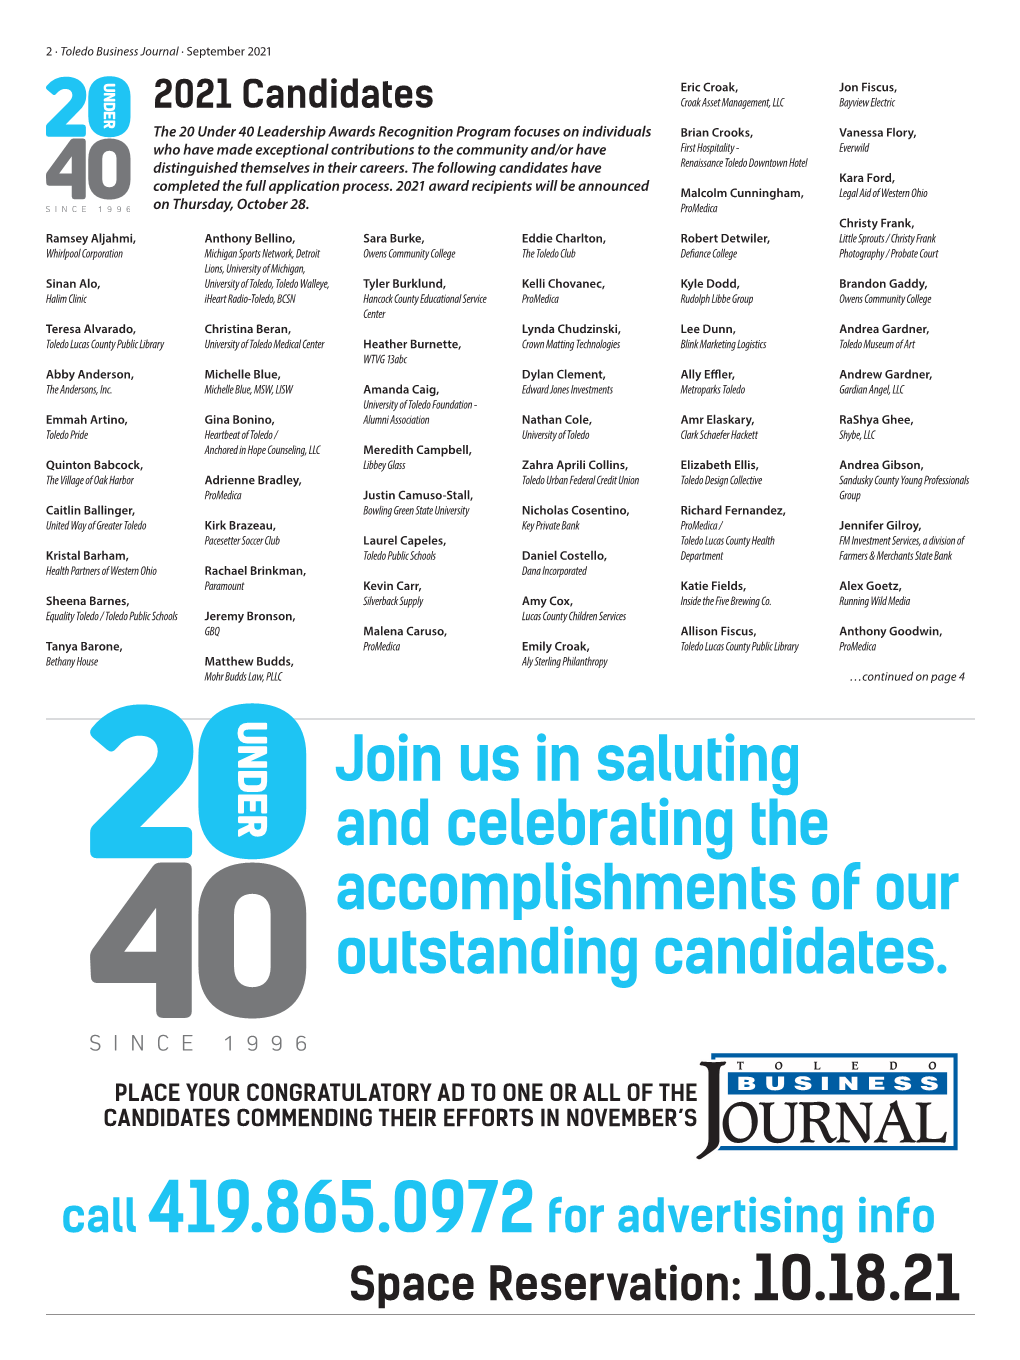 Join Us in Saluting and Celebrating the Accomplishments of Our Outstanding Candidates